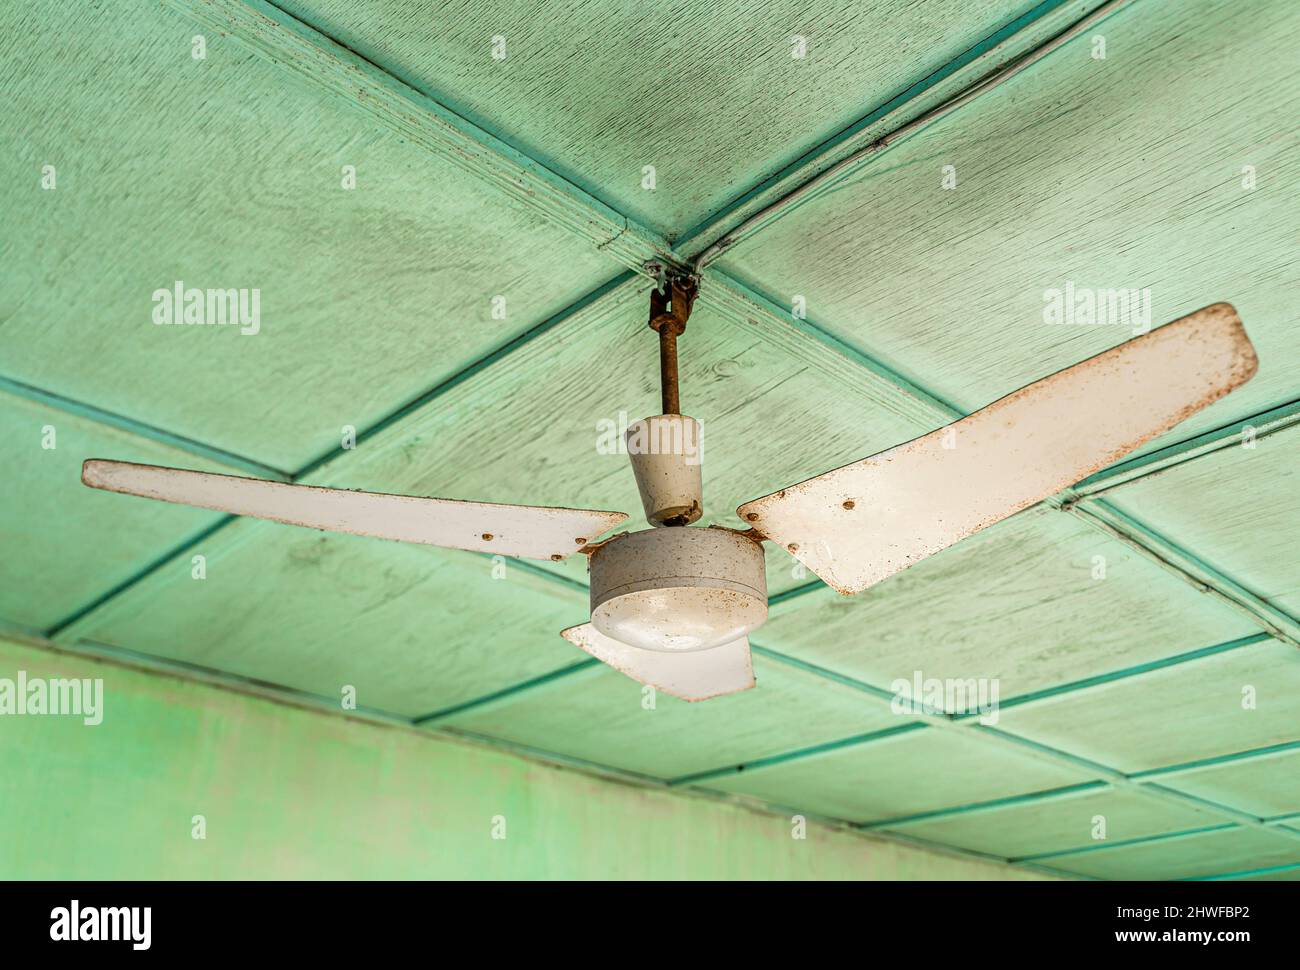 Electrically powered dusty white ceiling fan mounted on an old painted green ceiling Stock Photo